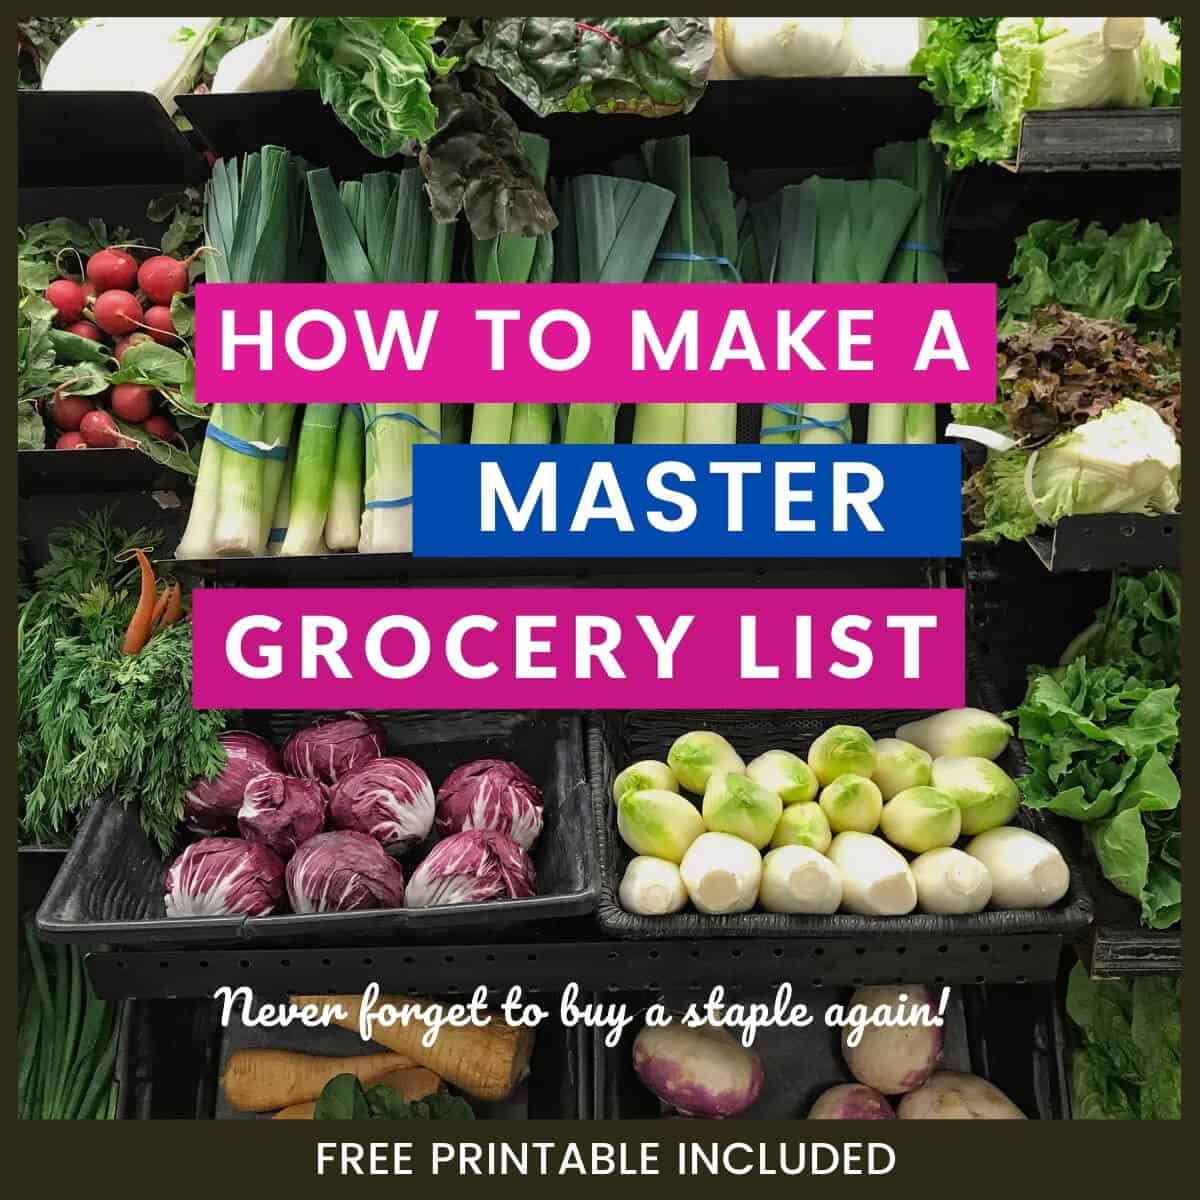 How to Make a Master Grocery List